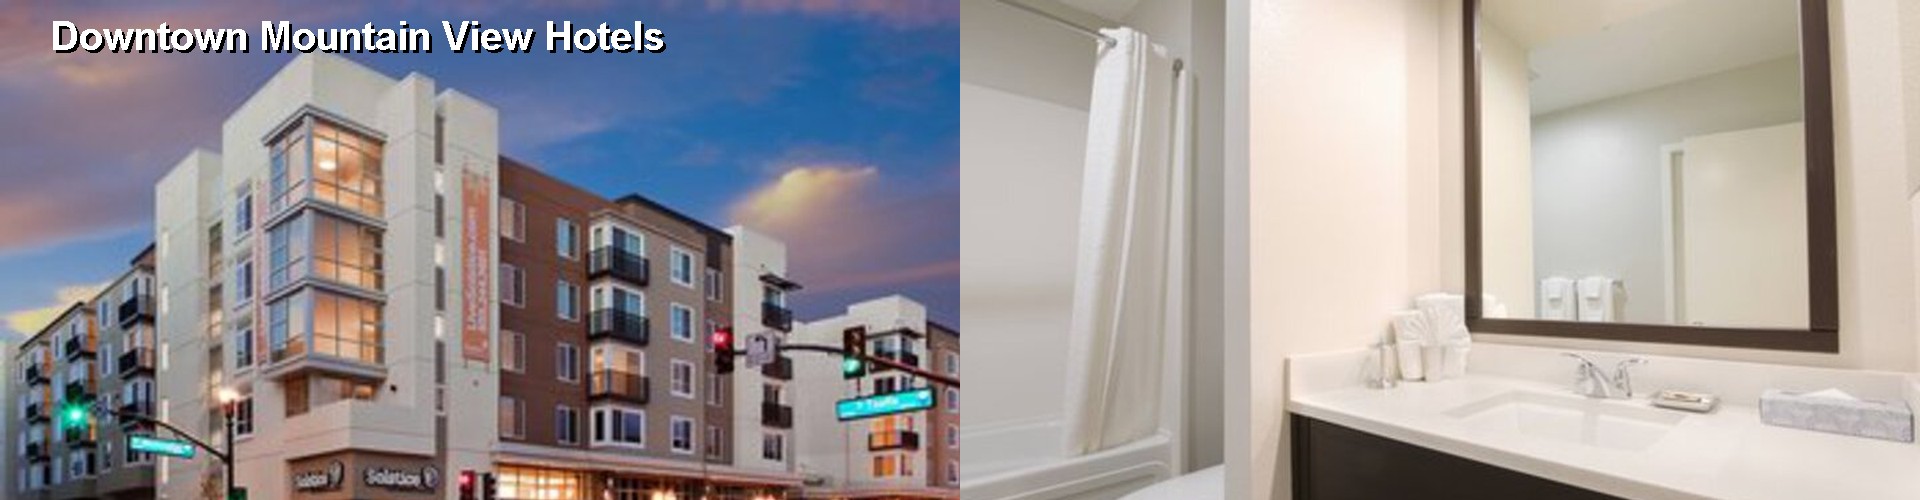 5 Best Hotels near Downtown Mountain View